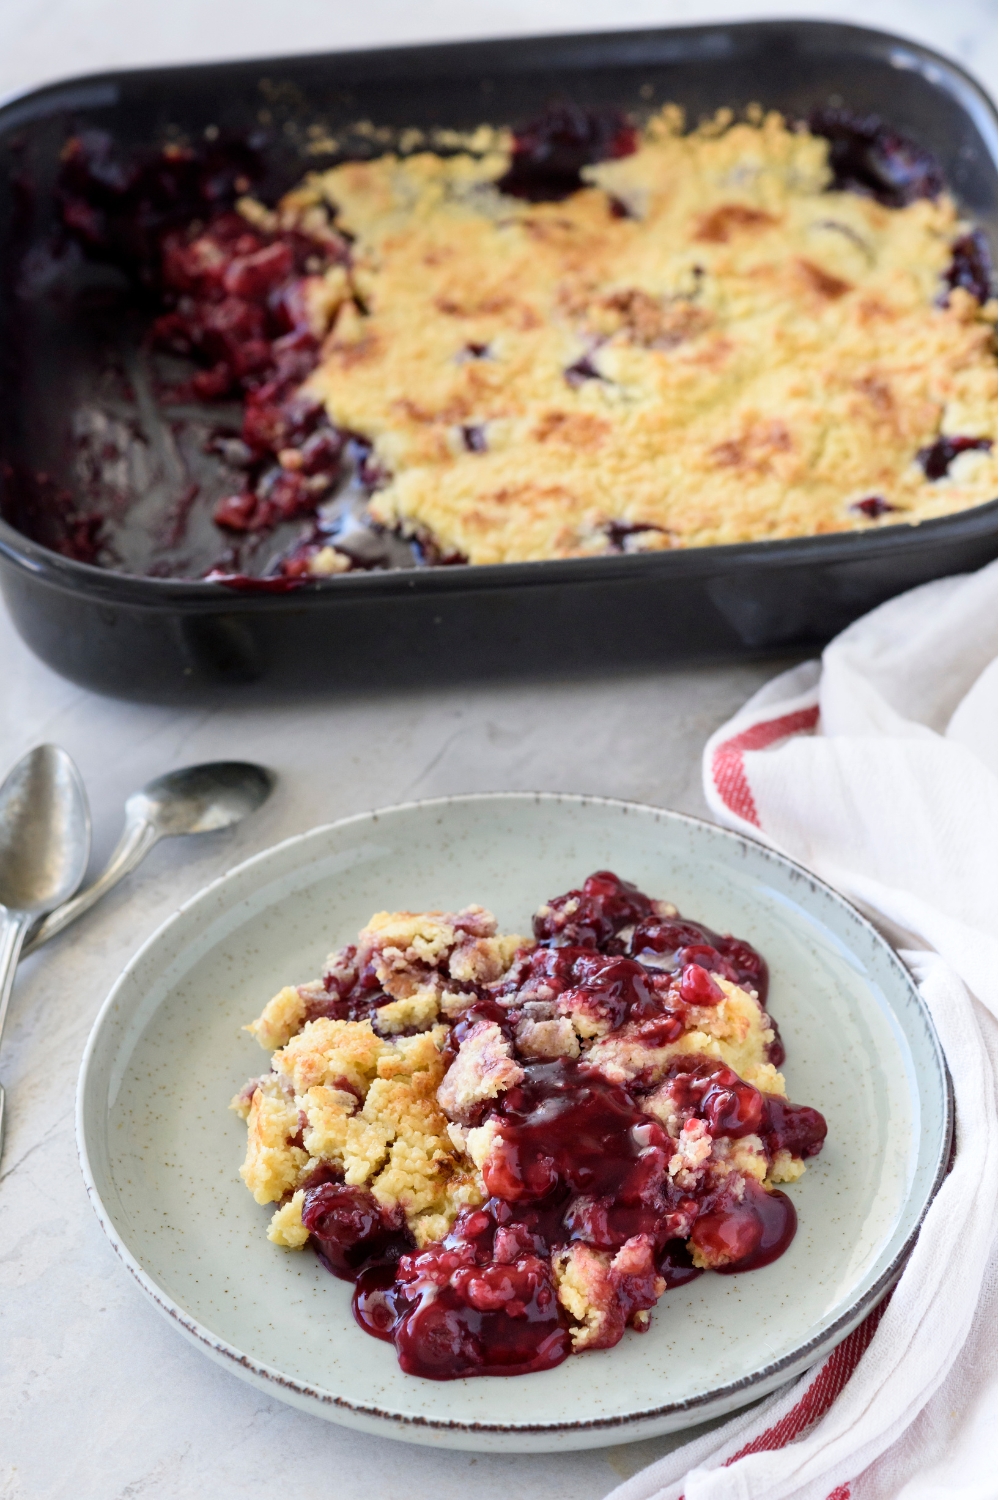 A pan with cherry dump cake. A plate with a serving of dump cake is next to the pan.